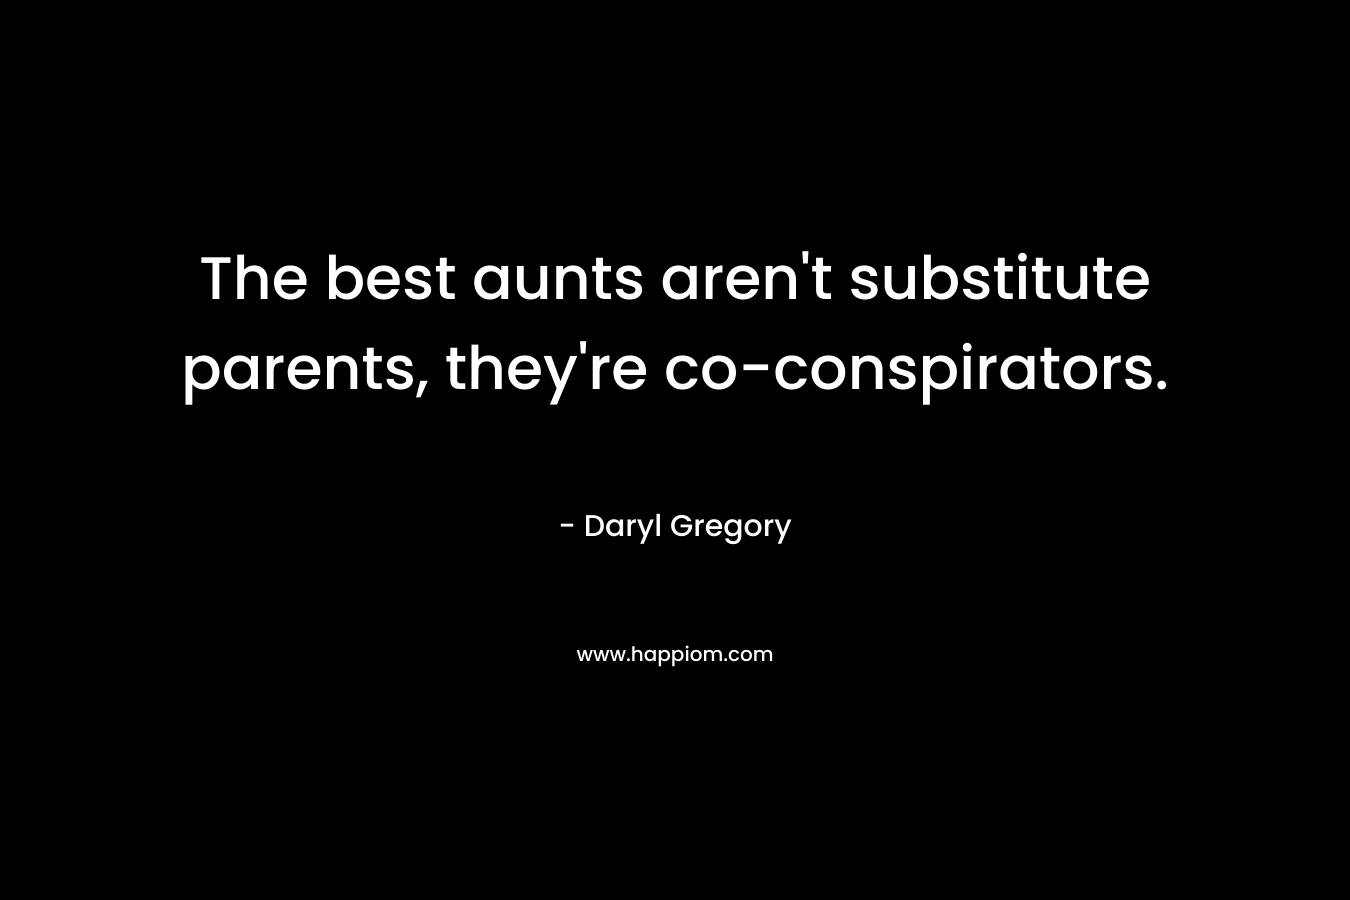 The best aunts aren’t substitute parents, they’re co-conspirators. – Daryl Gregory